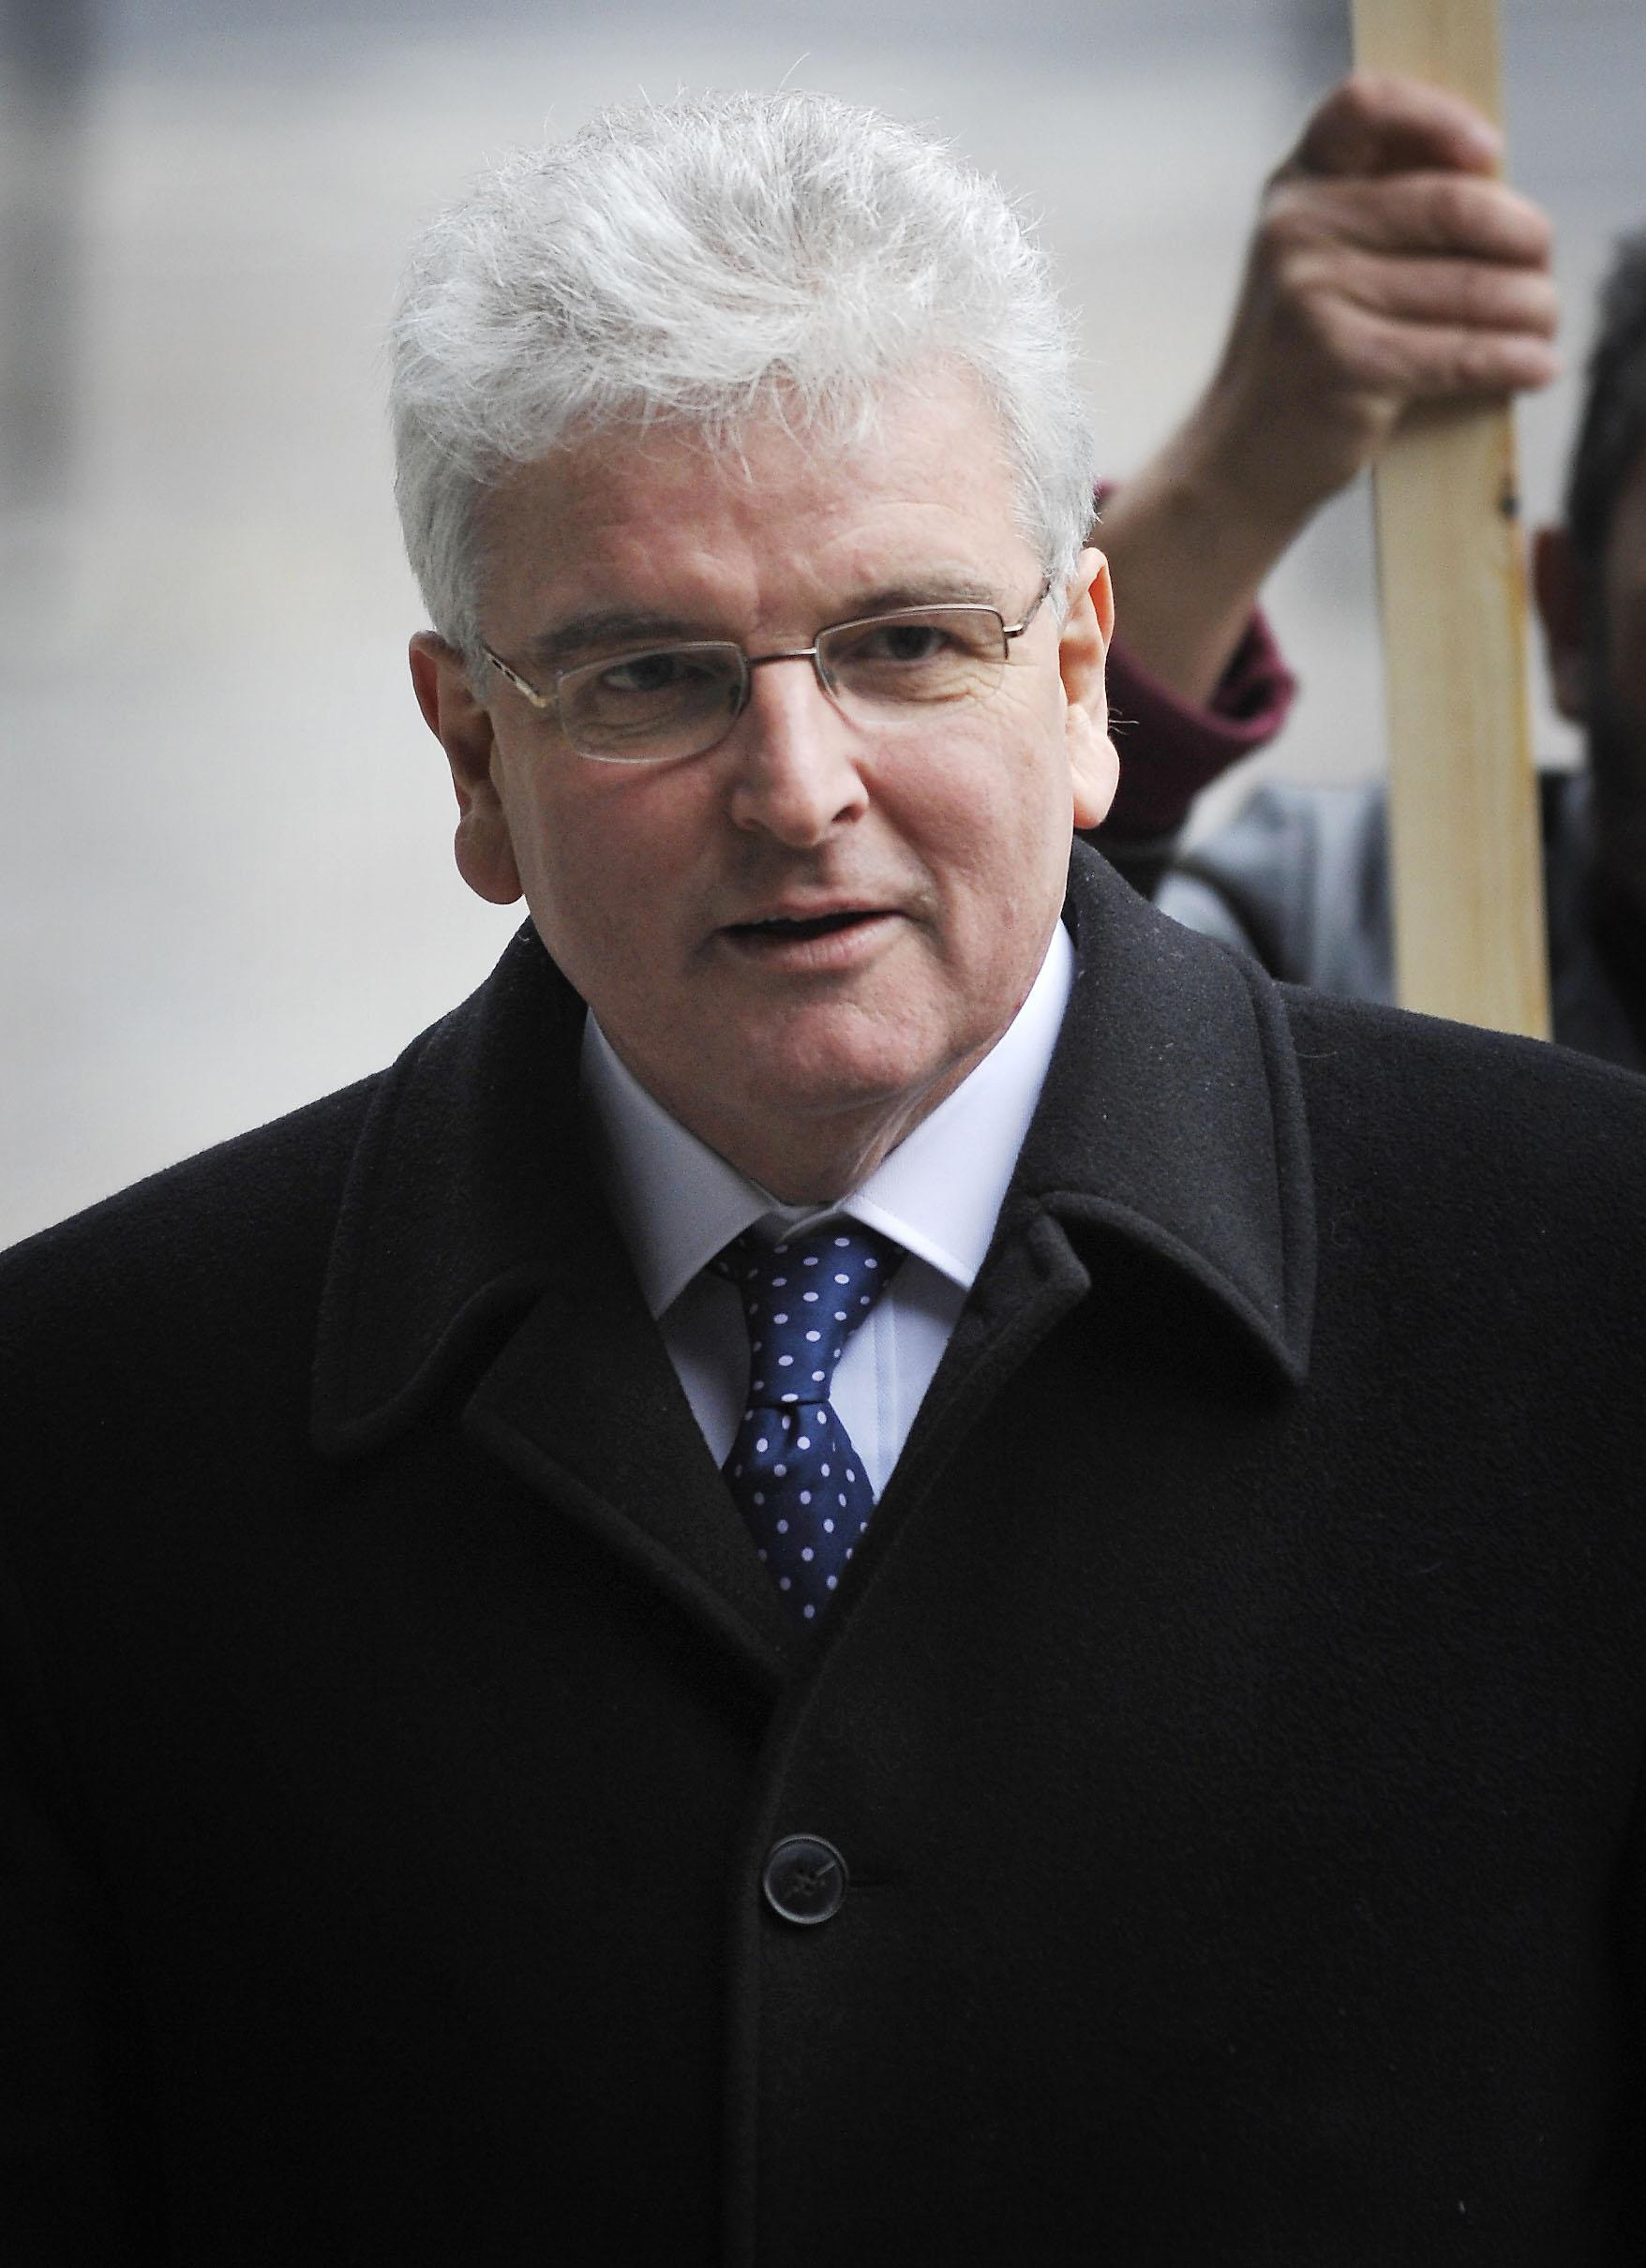 Baron Des Browne, a former secretary of state for Scotland.